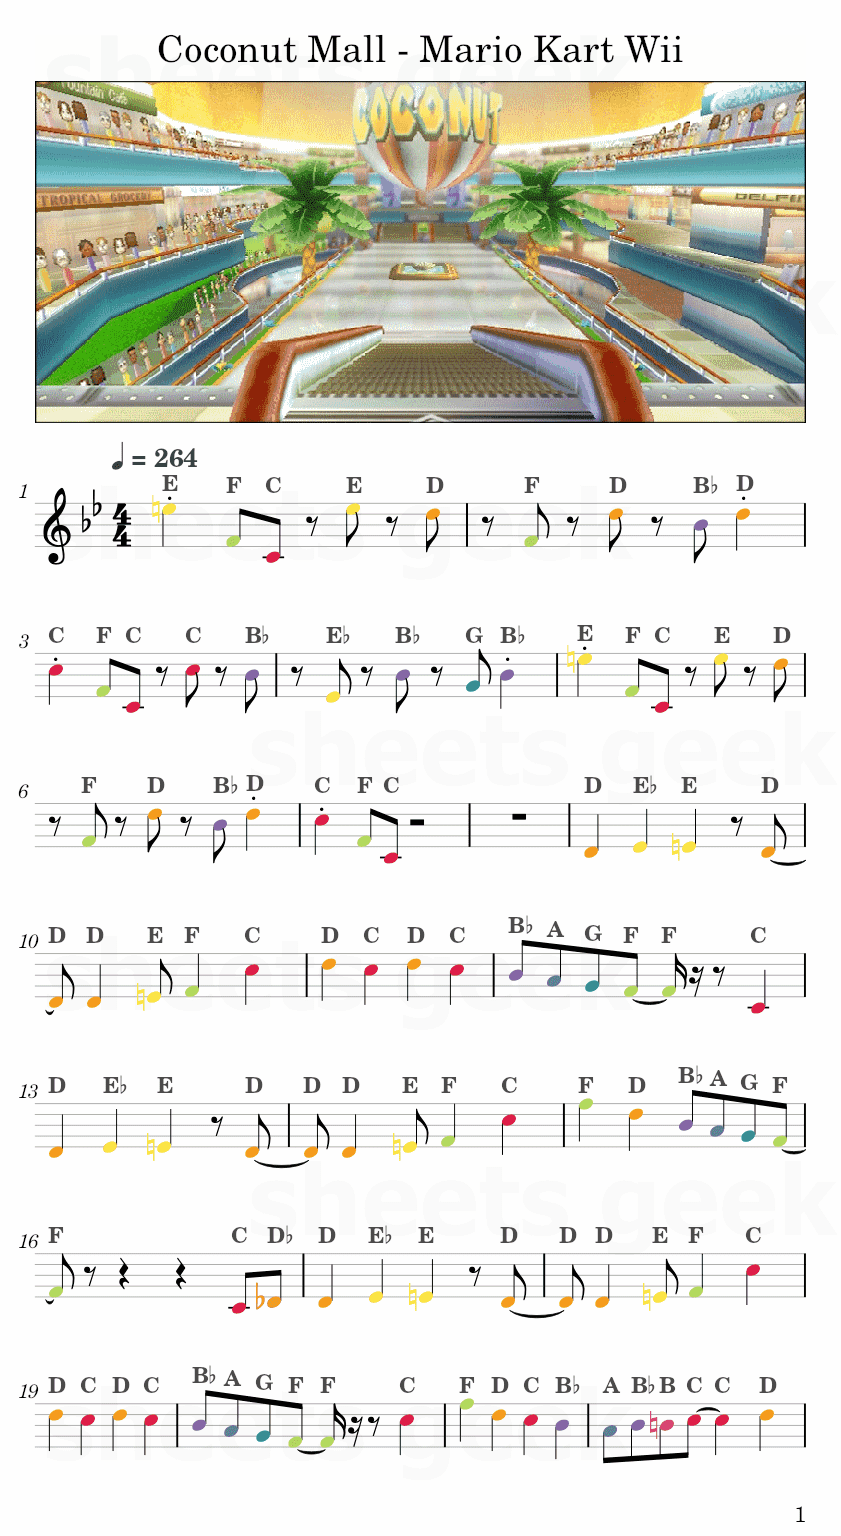 Coconut Mall - Mario Kart Wii Easy Sheet Music Free for piano, keyboard, flute, violin, sax, cello page 1